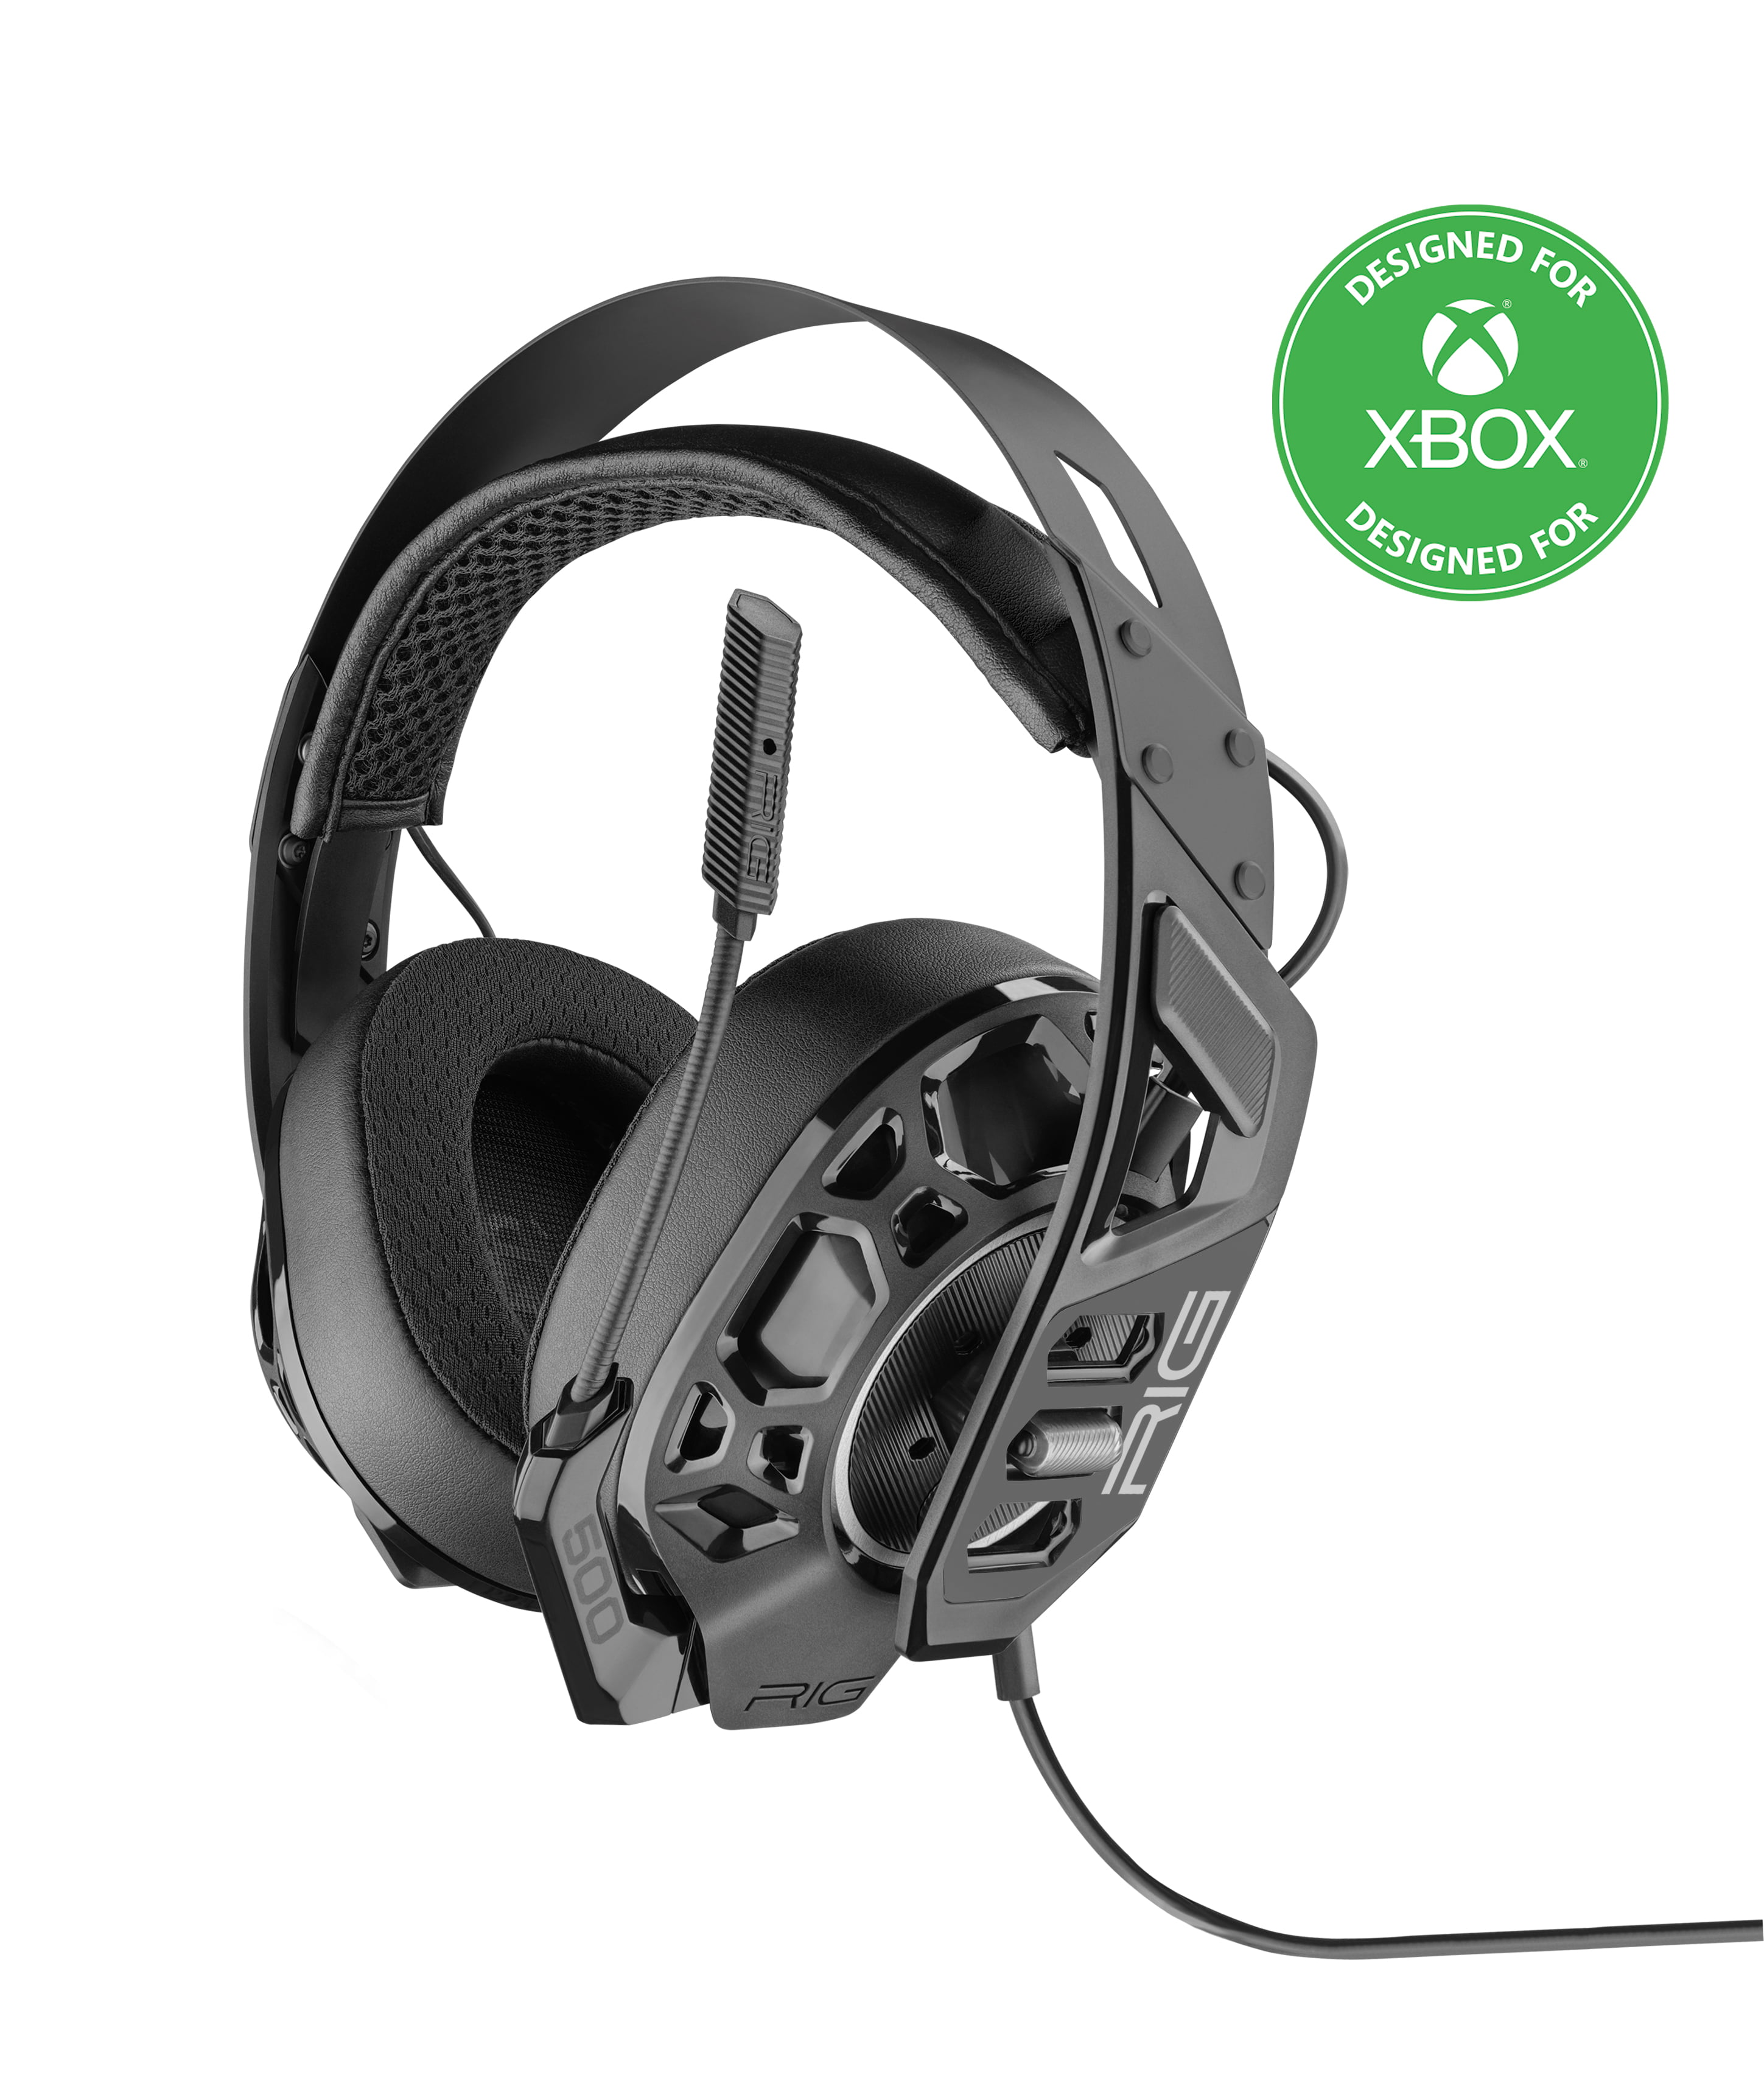 RIG 500 PRO HX Gen 2 Xbox Gaming Headset with 3D Audio